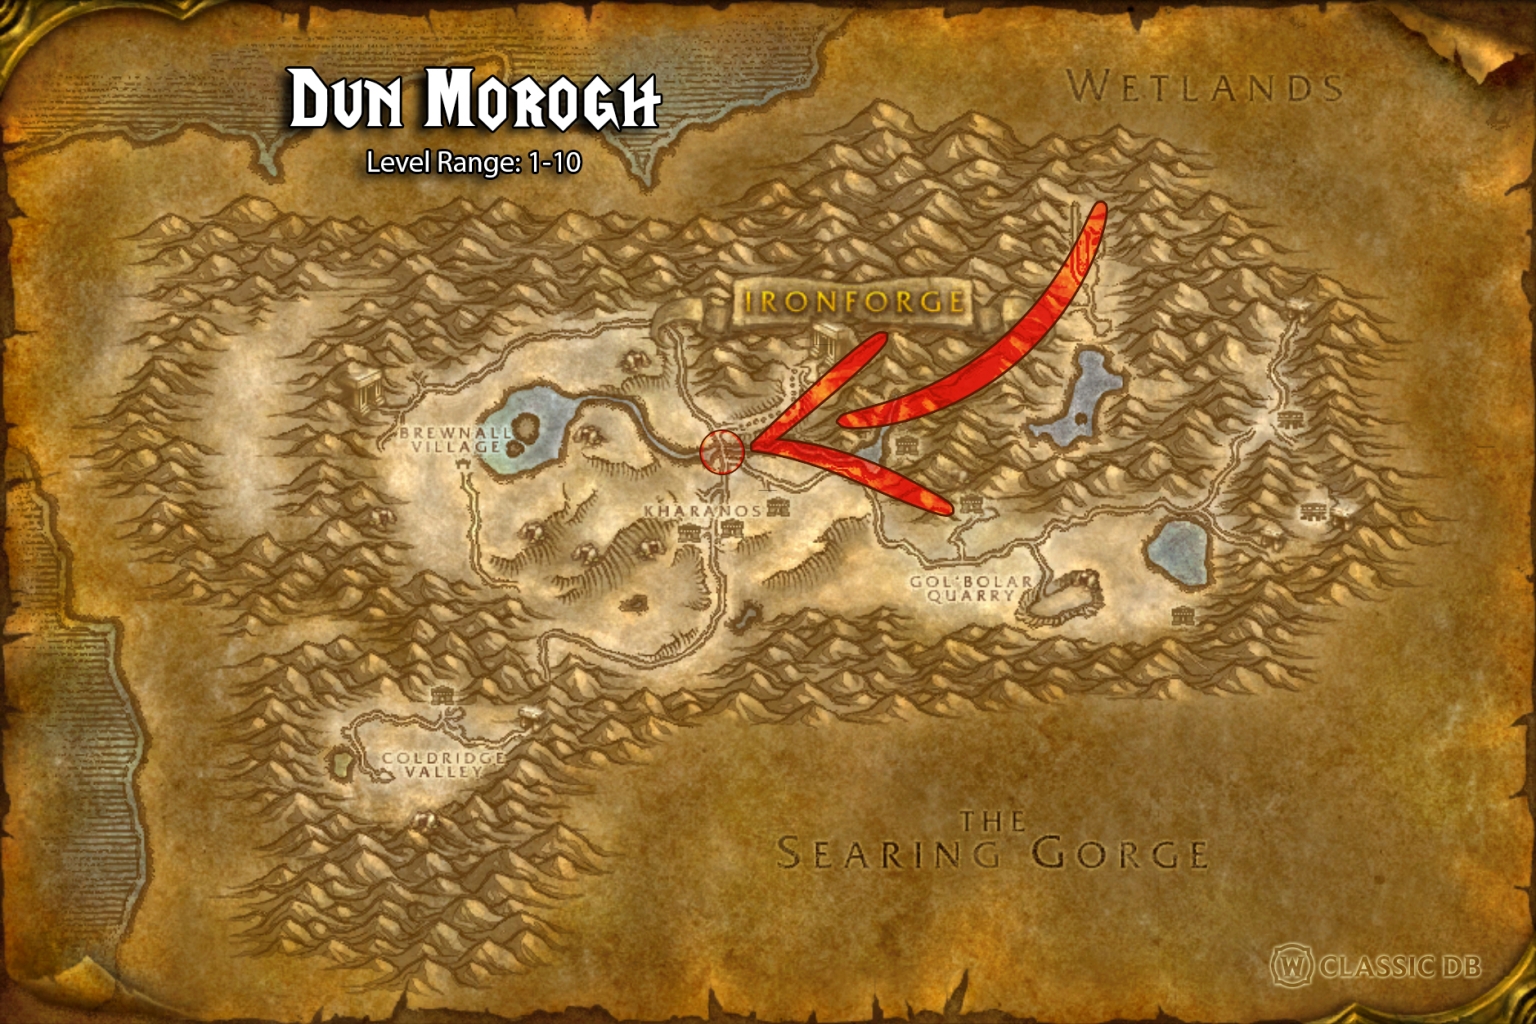 Where to Find the Quick Draw Rune in Season of Discovery (SoD